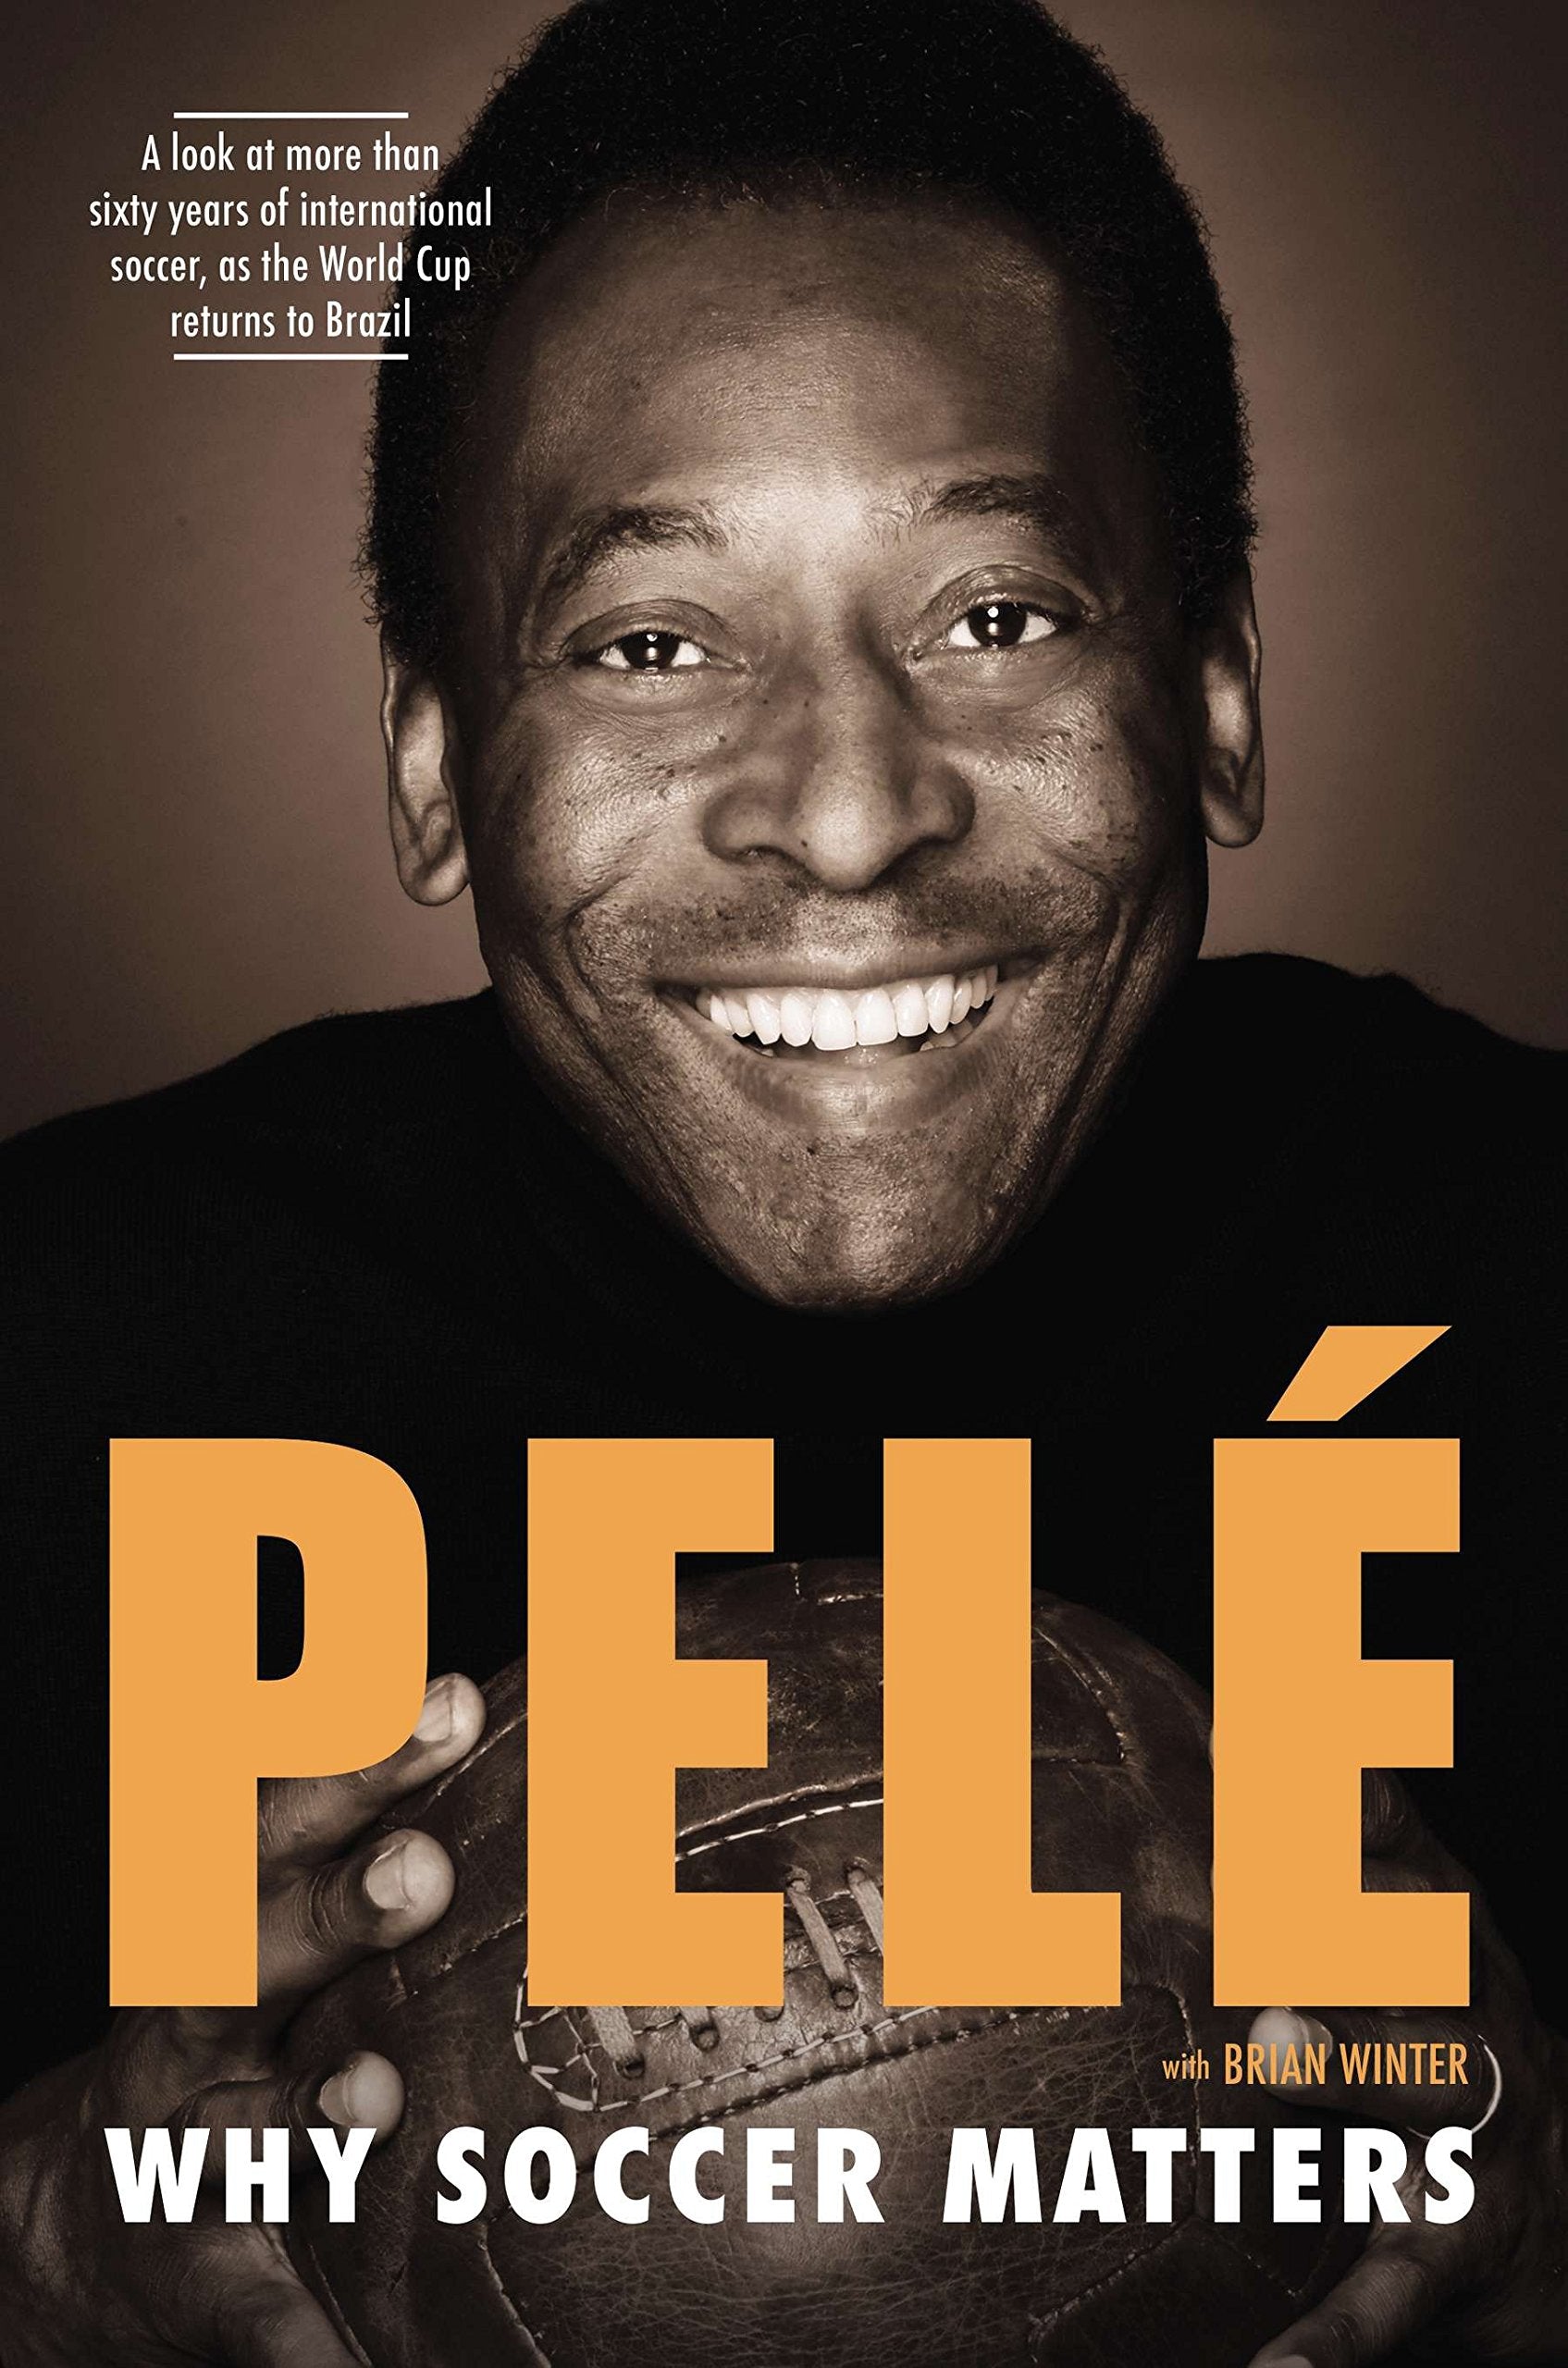 Inspire　–　Soccer　Pele　Bookspace　Matters　Why　PELE　by